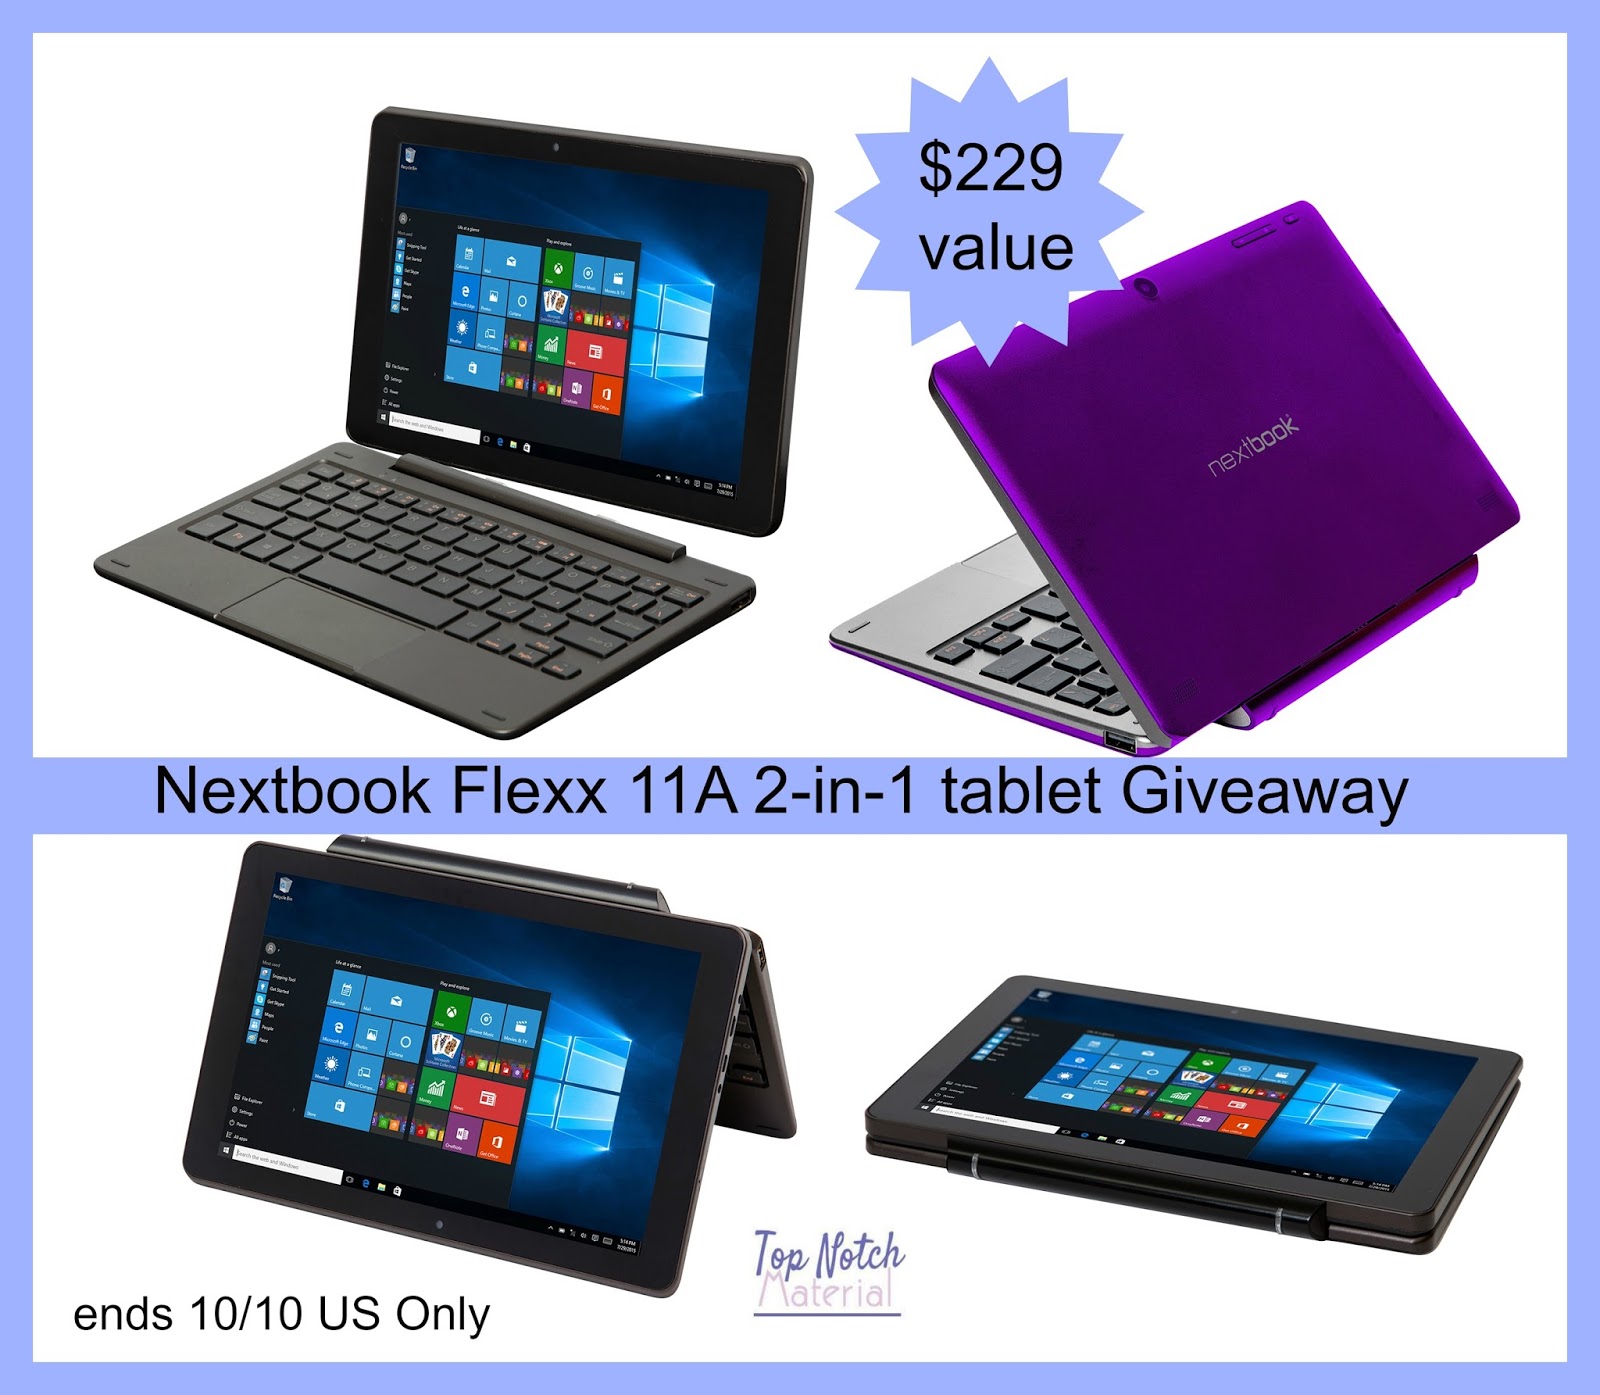 Top Notch Material: Nextbook Flexx 11A 2-in-1 Tablet Giveaway